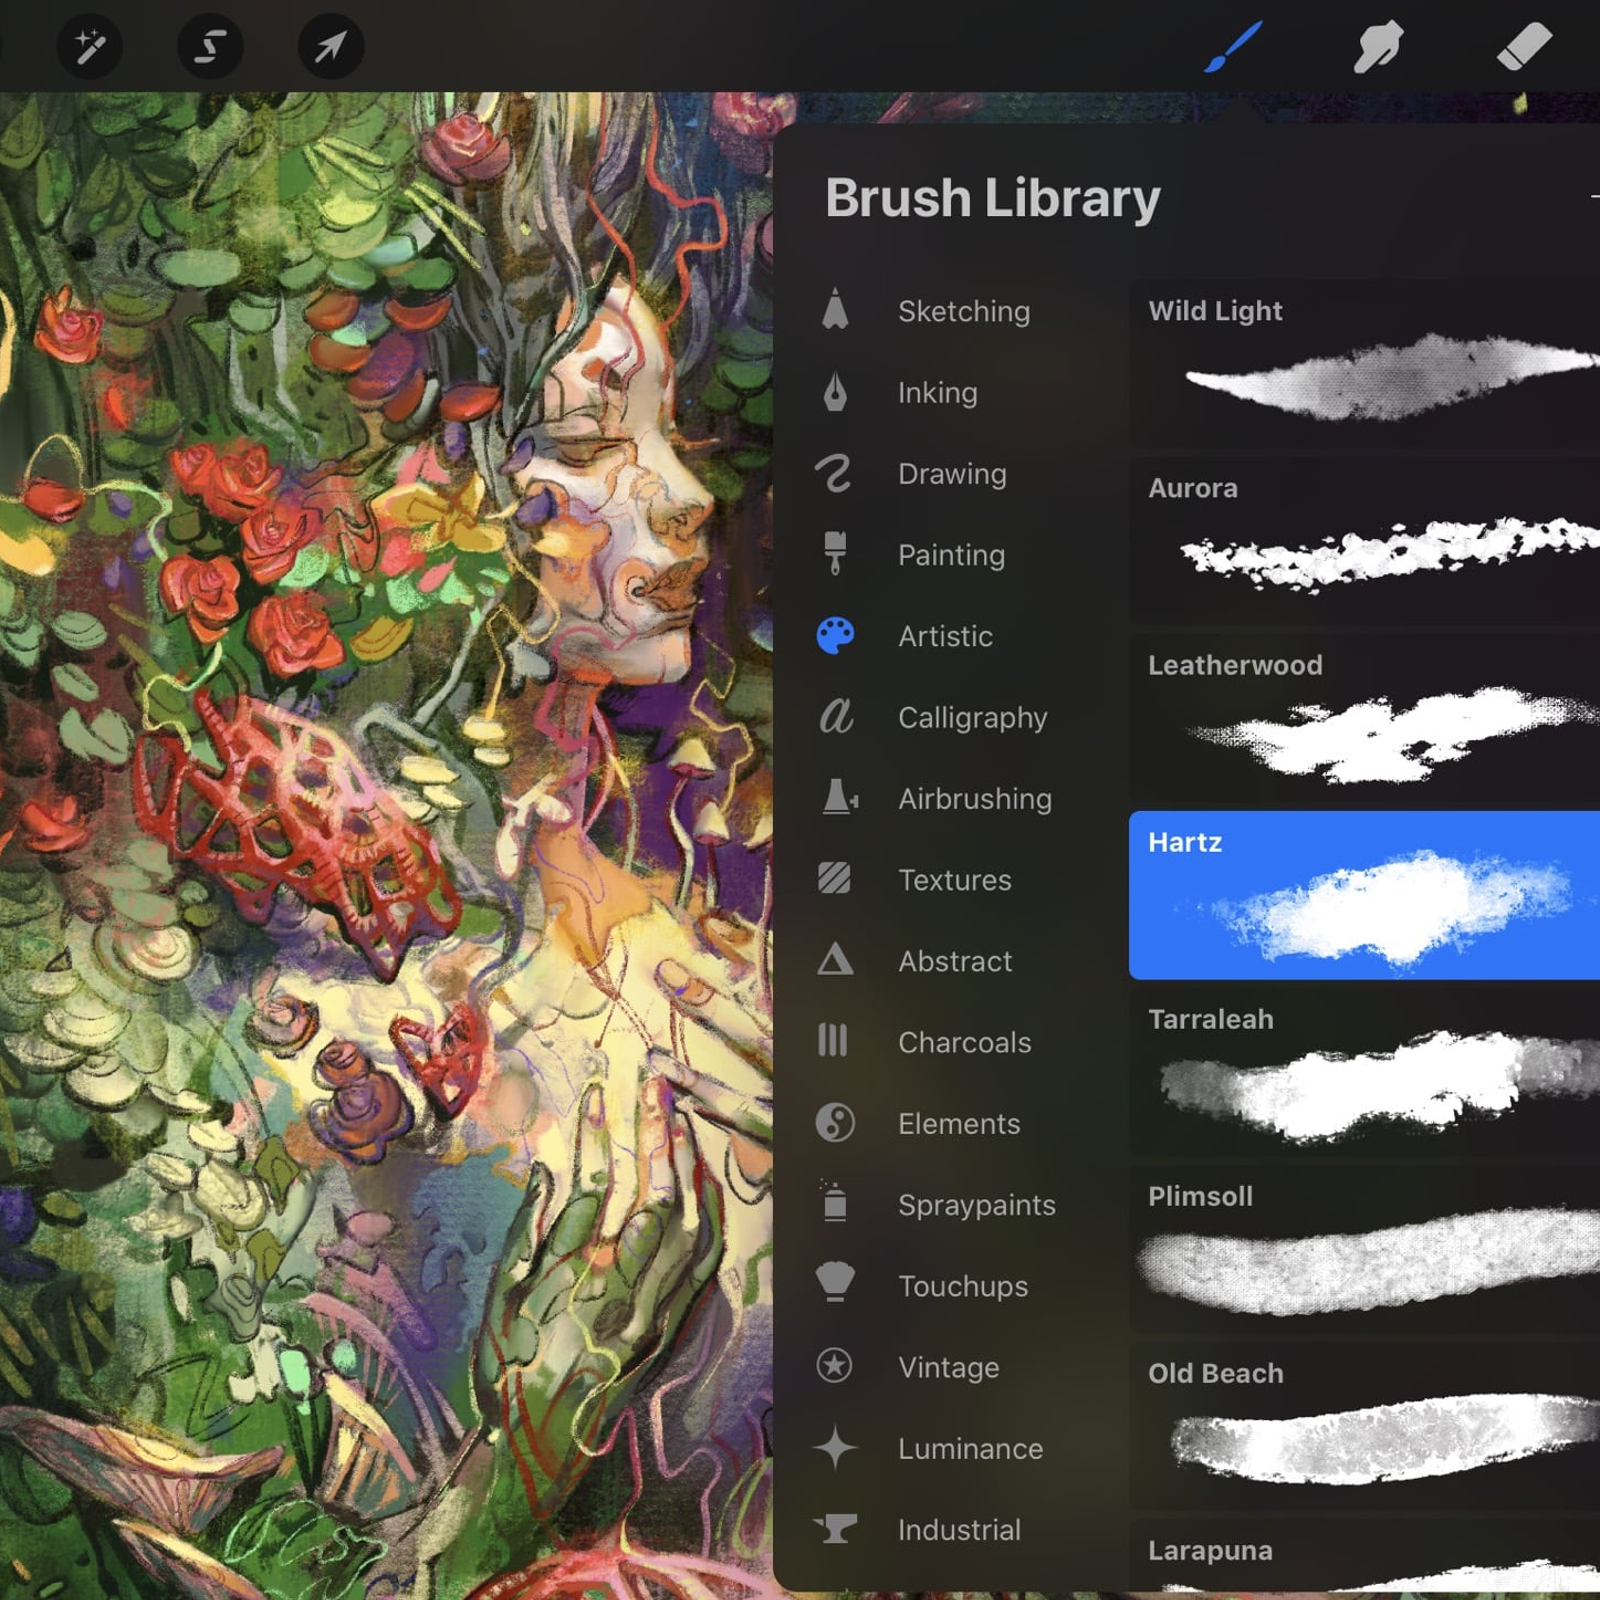 apps similar to procreate that are free